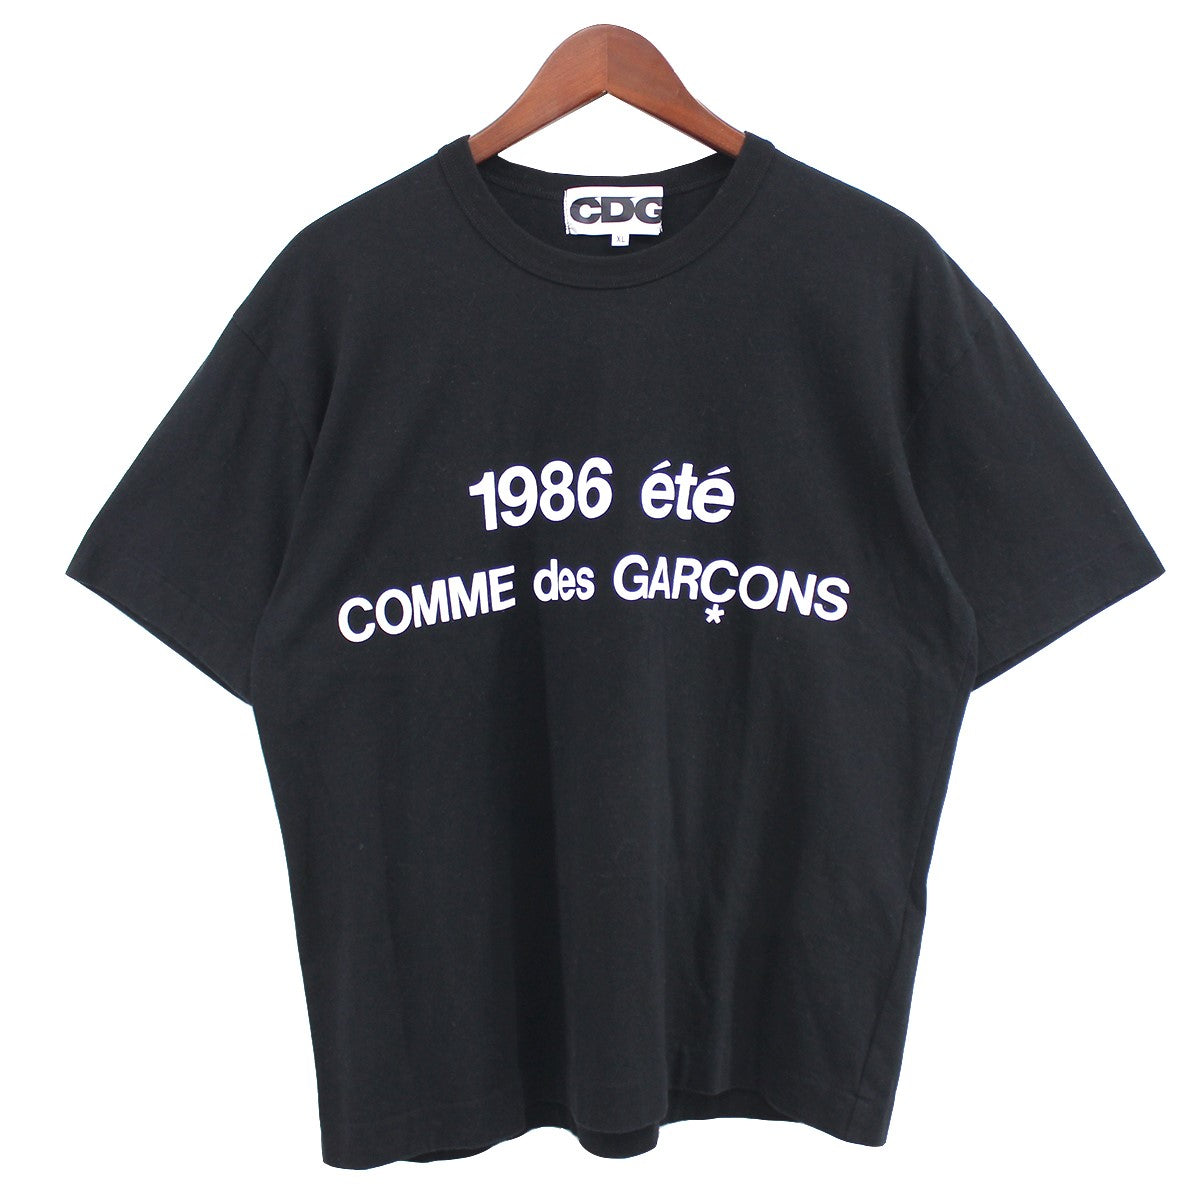 COMME des GARCONS CDG(コムデギャルソン シーディージー) 22SS 1986 ...